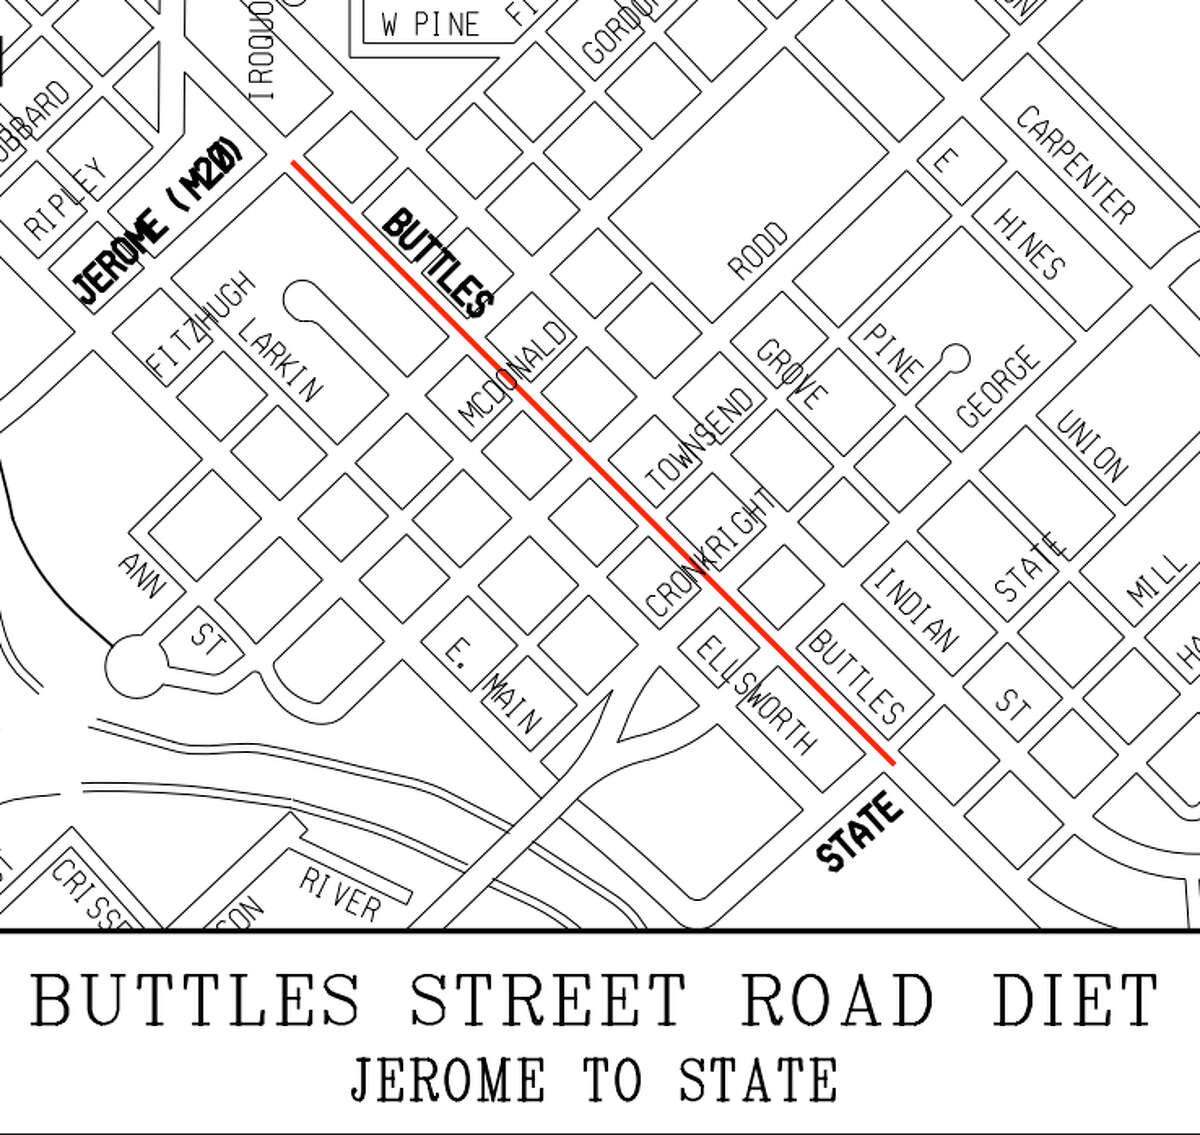 The proposed road diet would convert the three lanes on Buttles Street to two lanes. (Courtesy of the City of Midland)